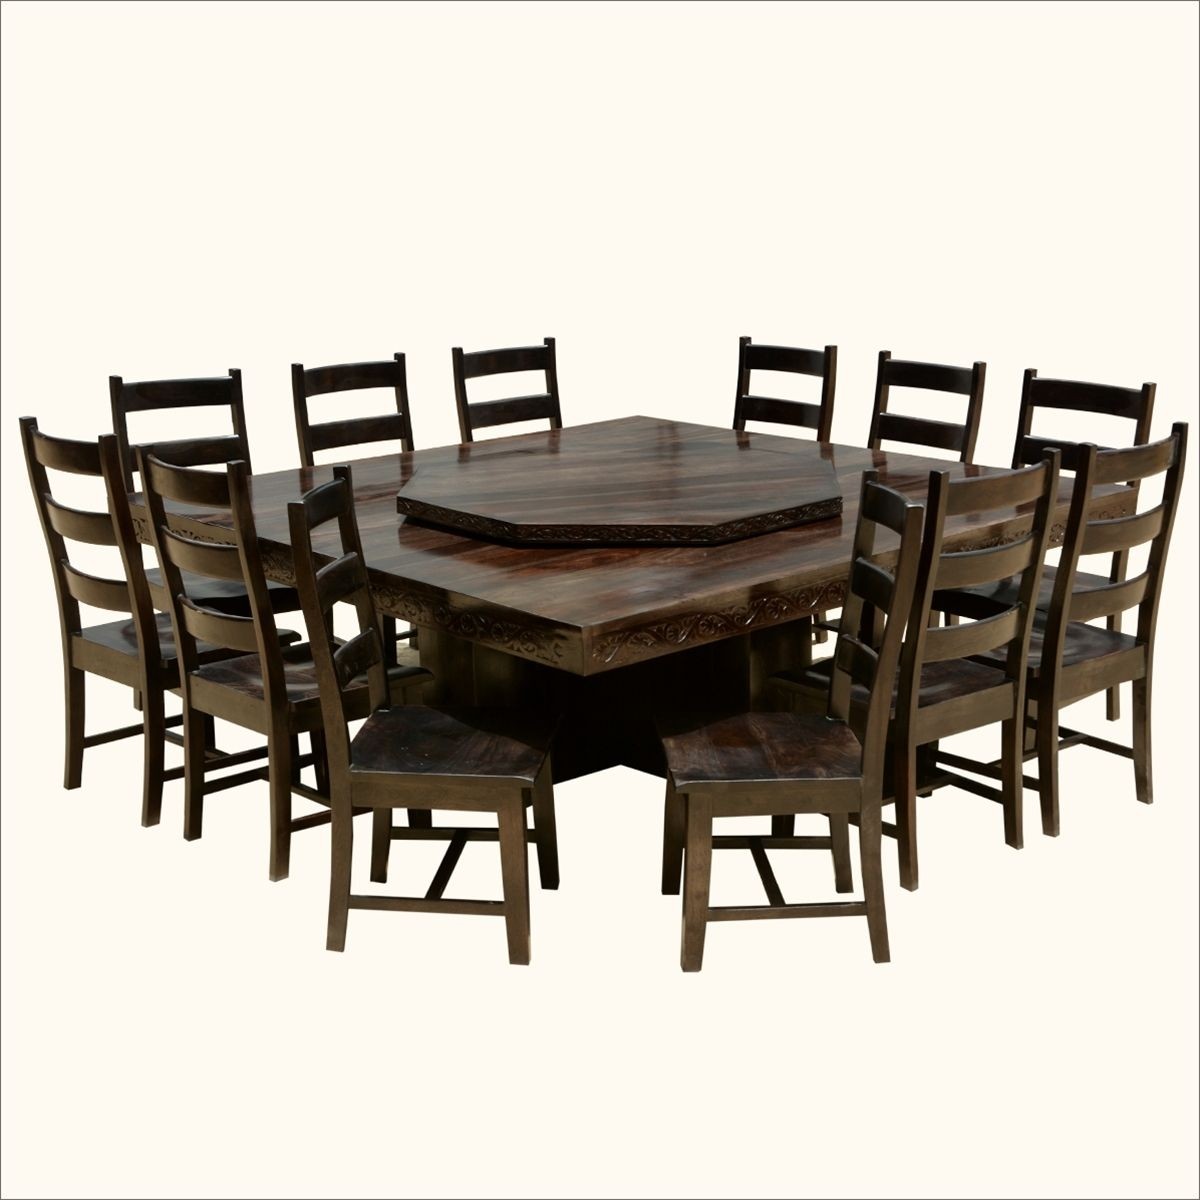 Dining room table with lazy susan jun 2020